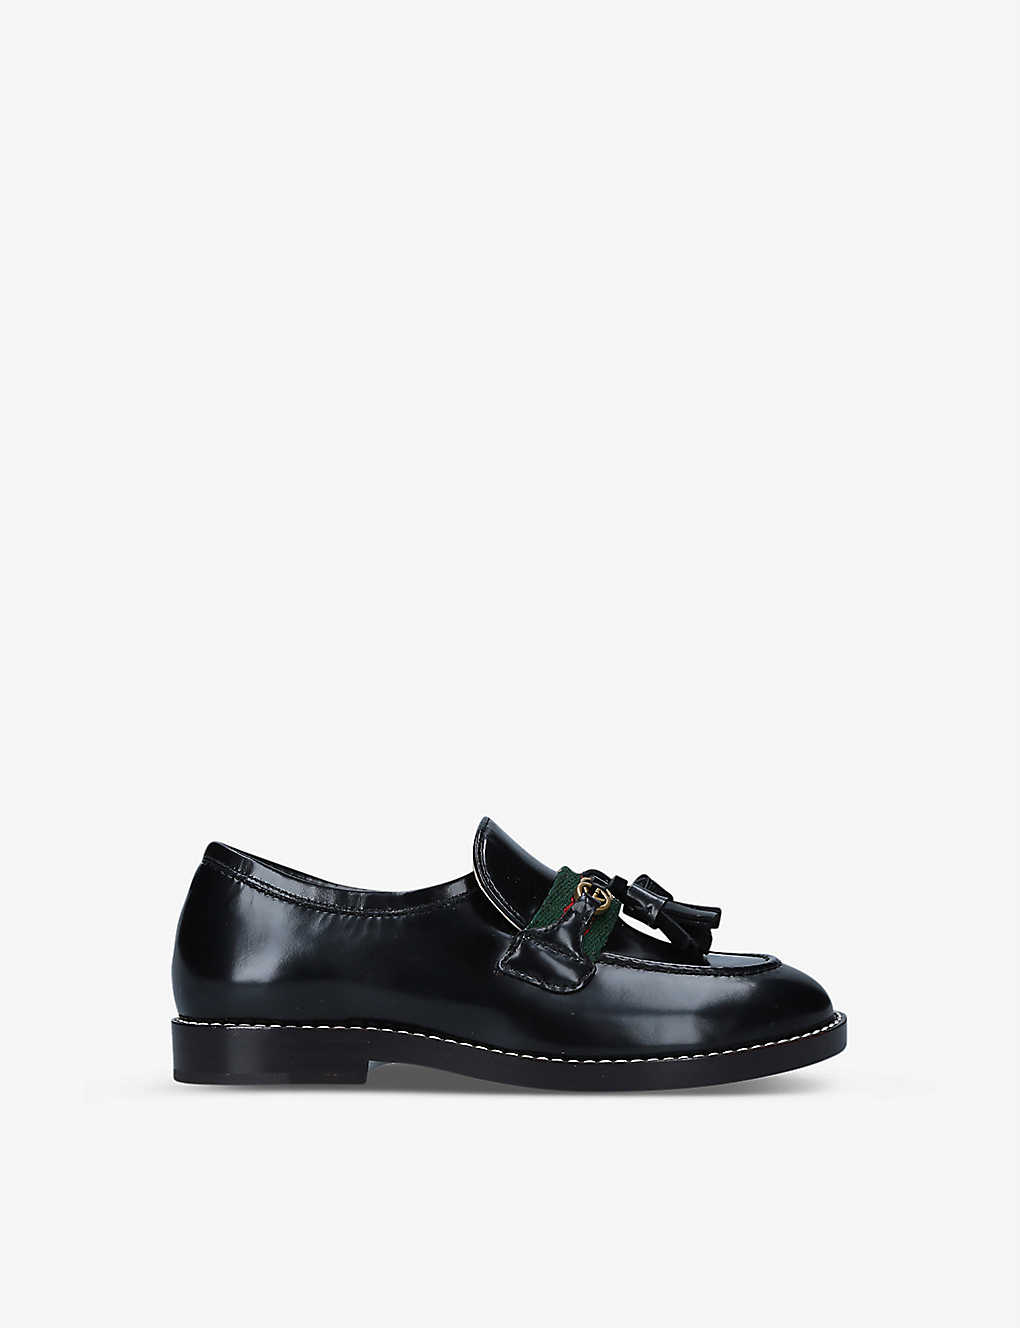 Gucci Kids' Faye Tasselled Leather Loafers 4-8 Years Old In Black/comb